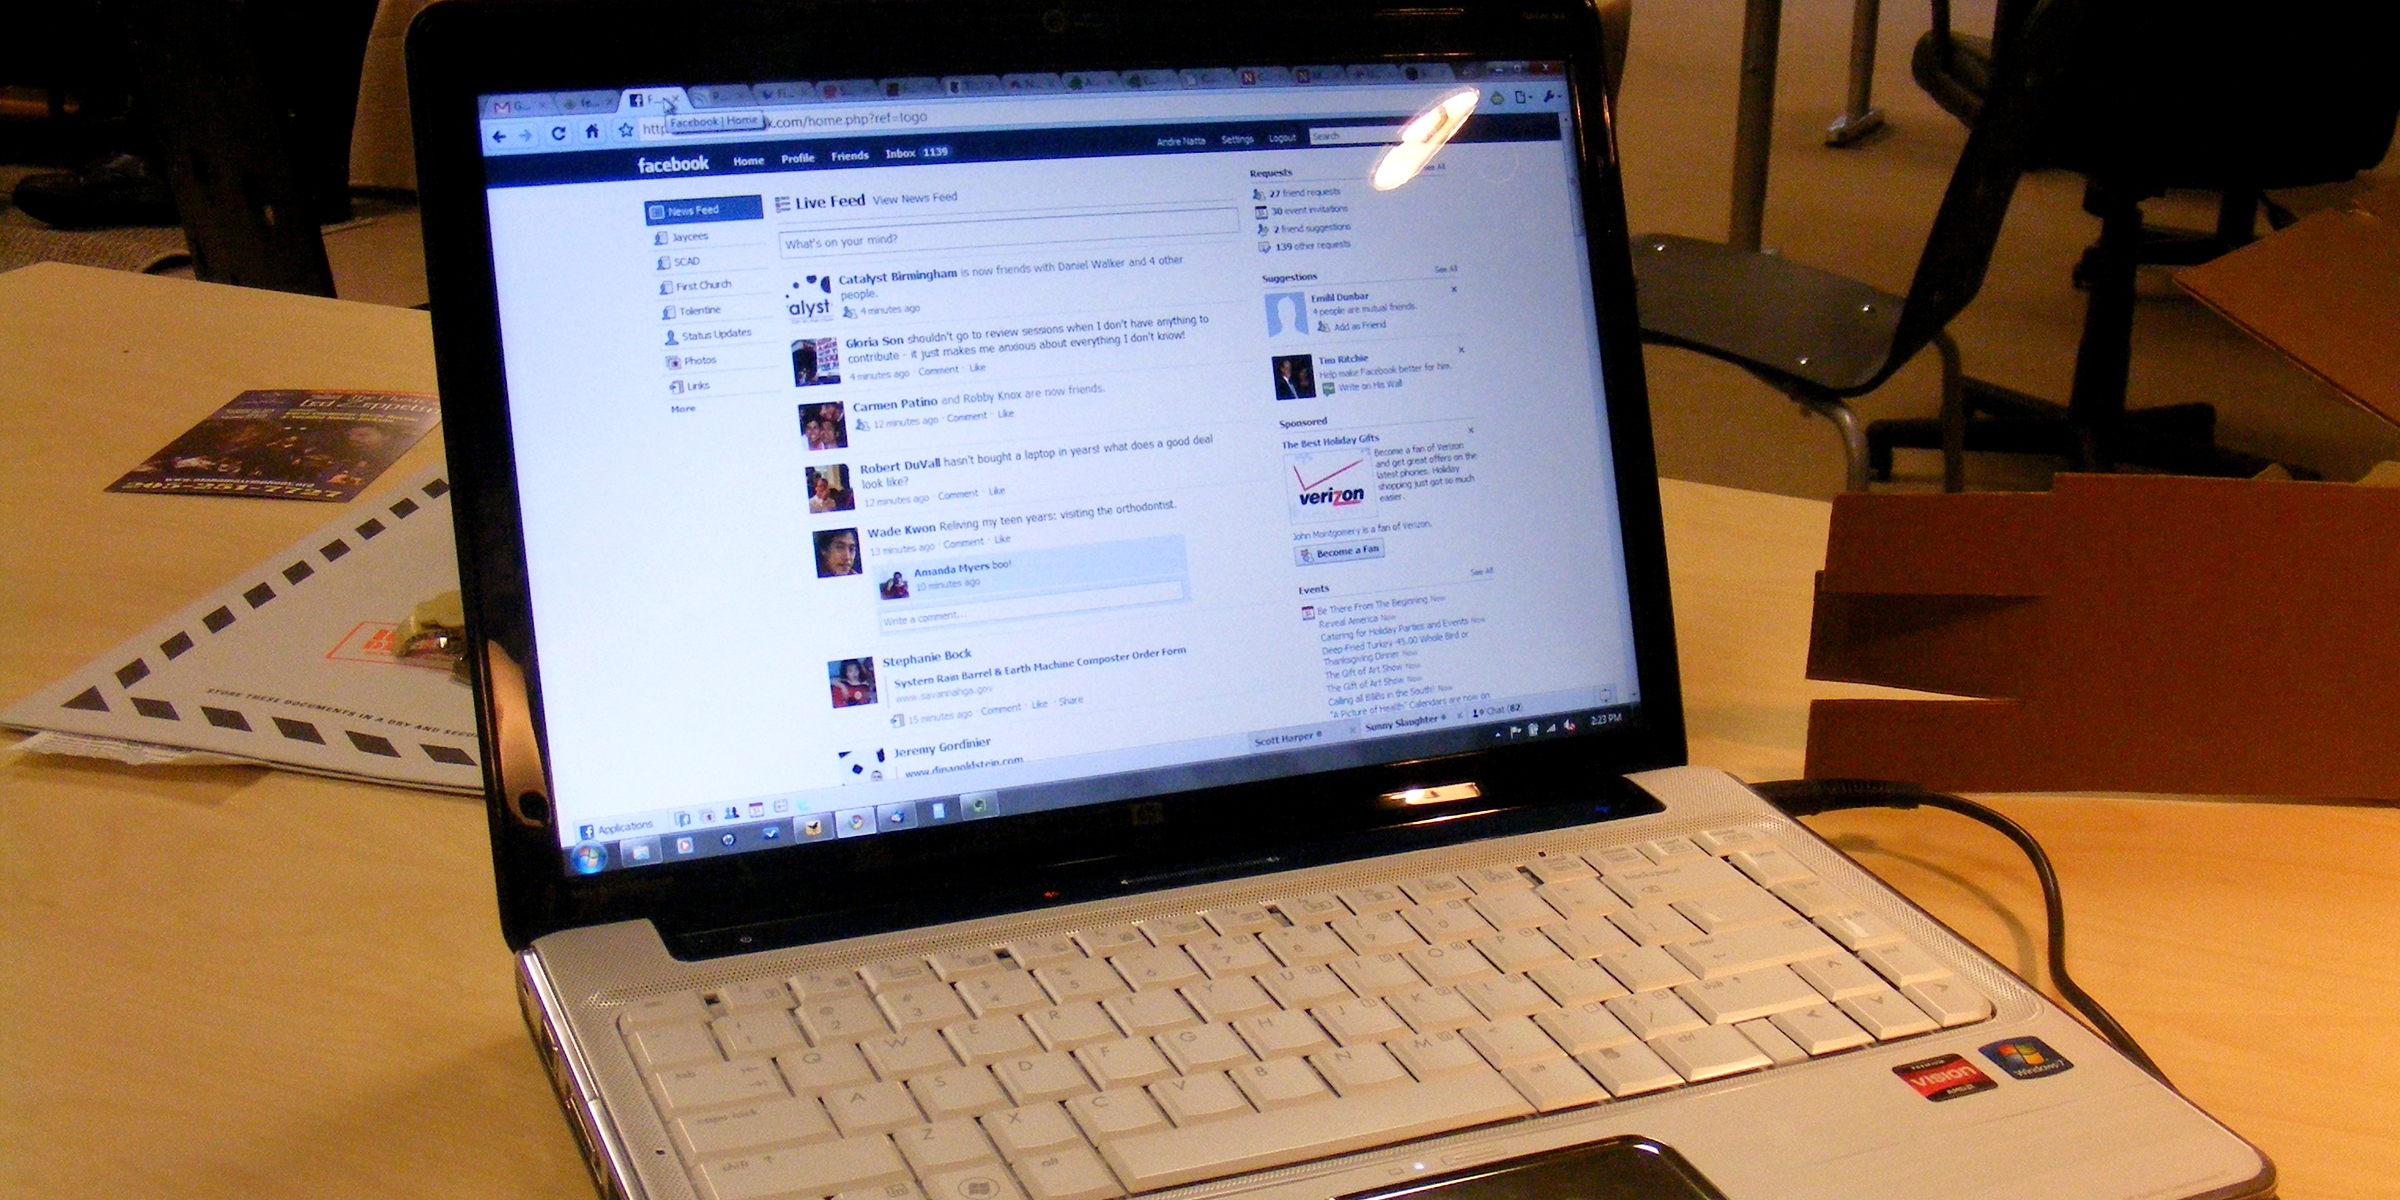 An open laptop set on a Facebook page | Source: flickr.com/acnatta/CC BY 2.0